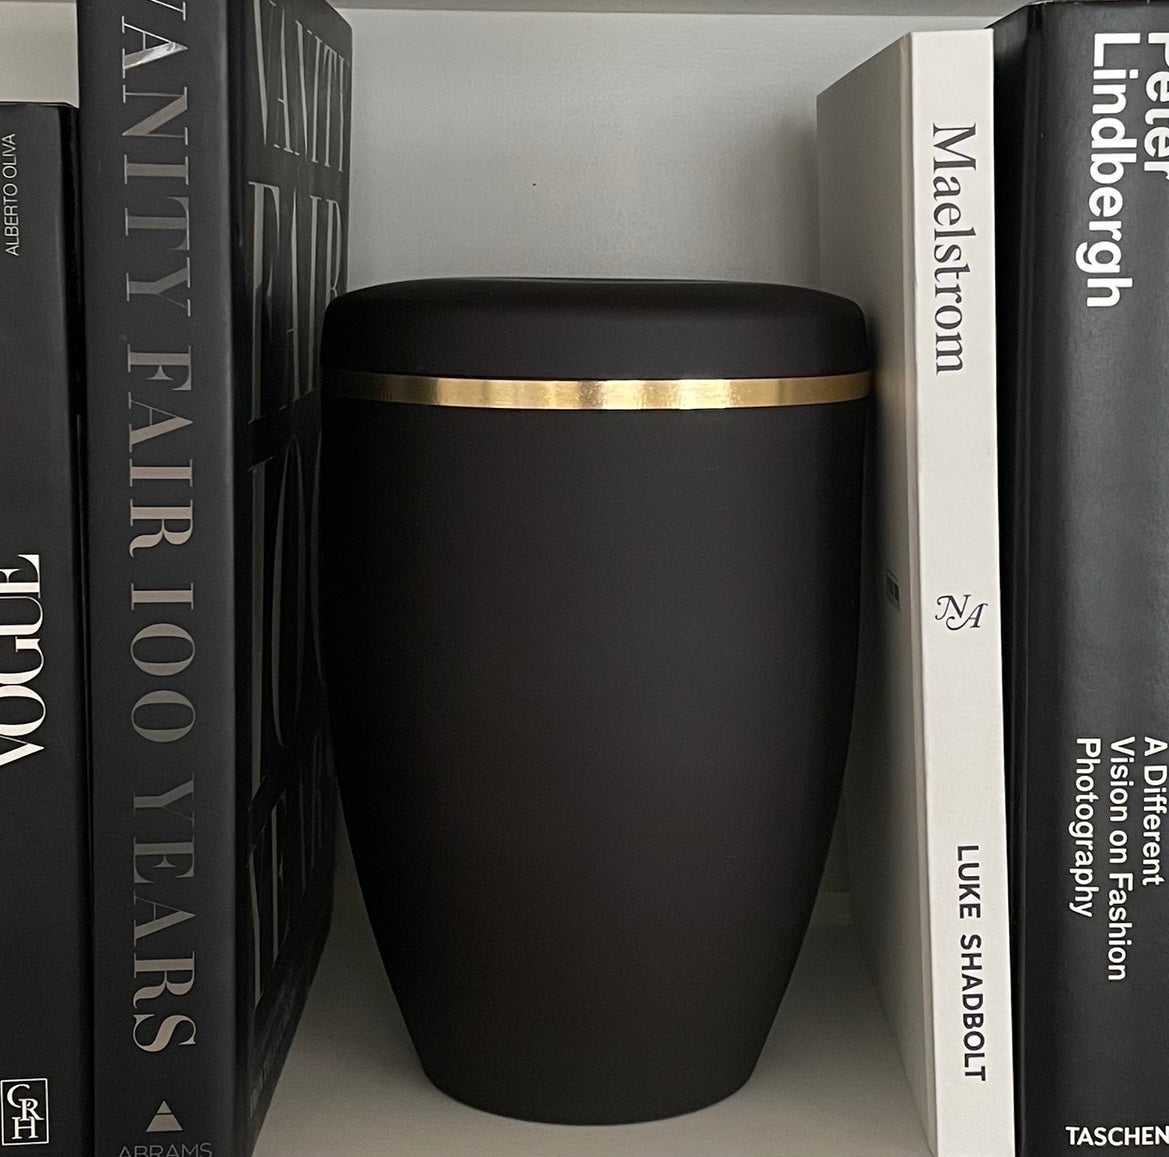 Simple and dignified black urn for ashes with a brushed gold band. The black urn sits on a bookshelf next to black and white books.